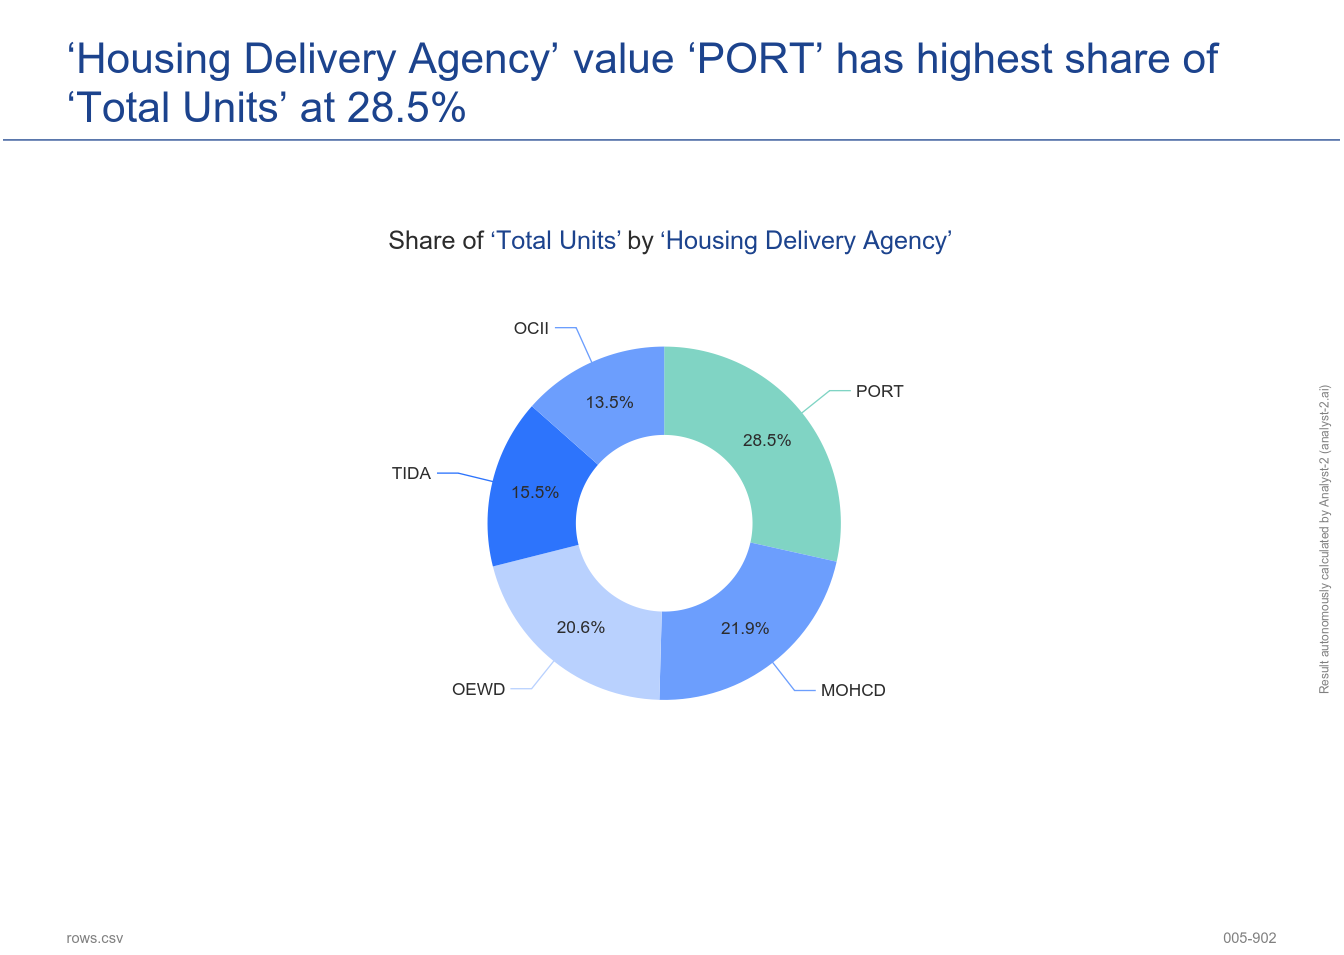 The ‘Housing Delivery Agency’ value ‘PORT’ has the highest share of ‘Total Units’ at 28.5%. ([DRAFT] Priority Permits - 005-902)